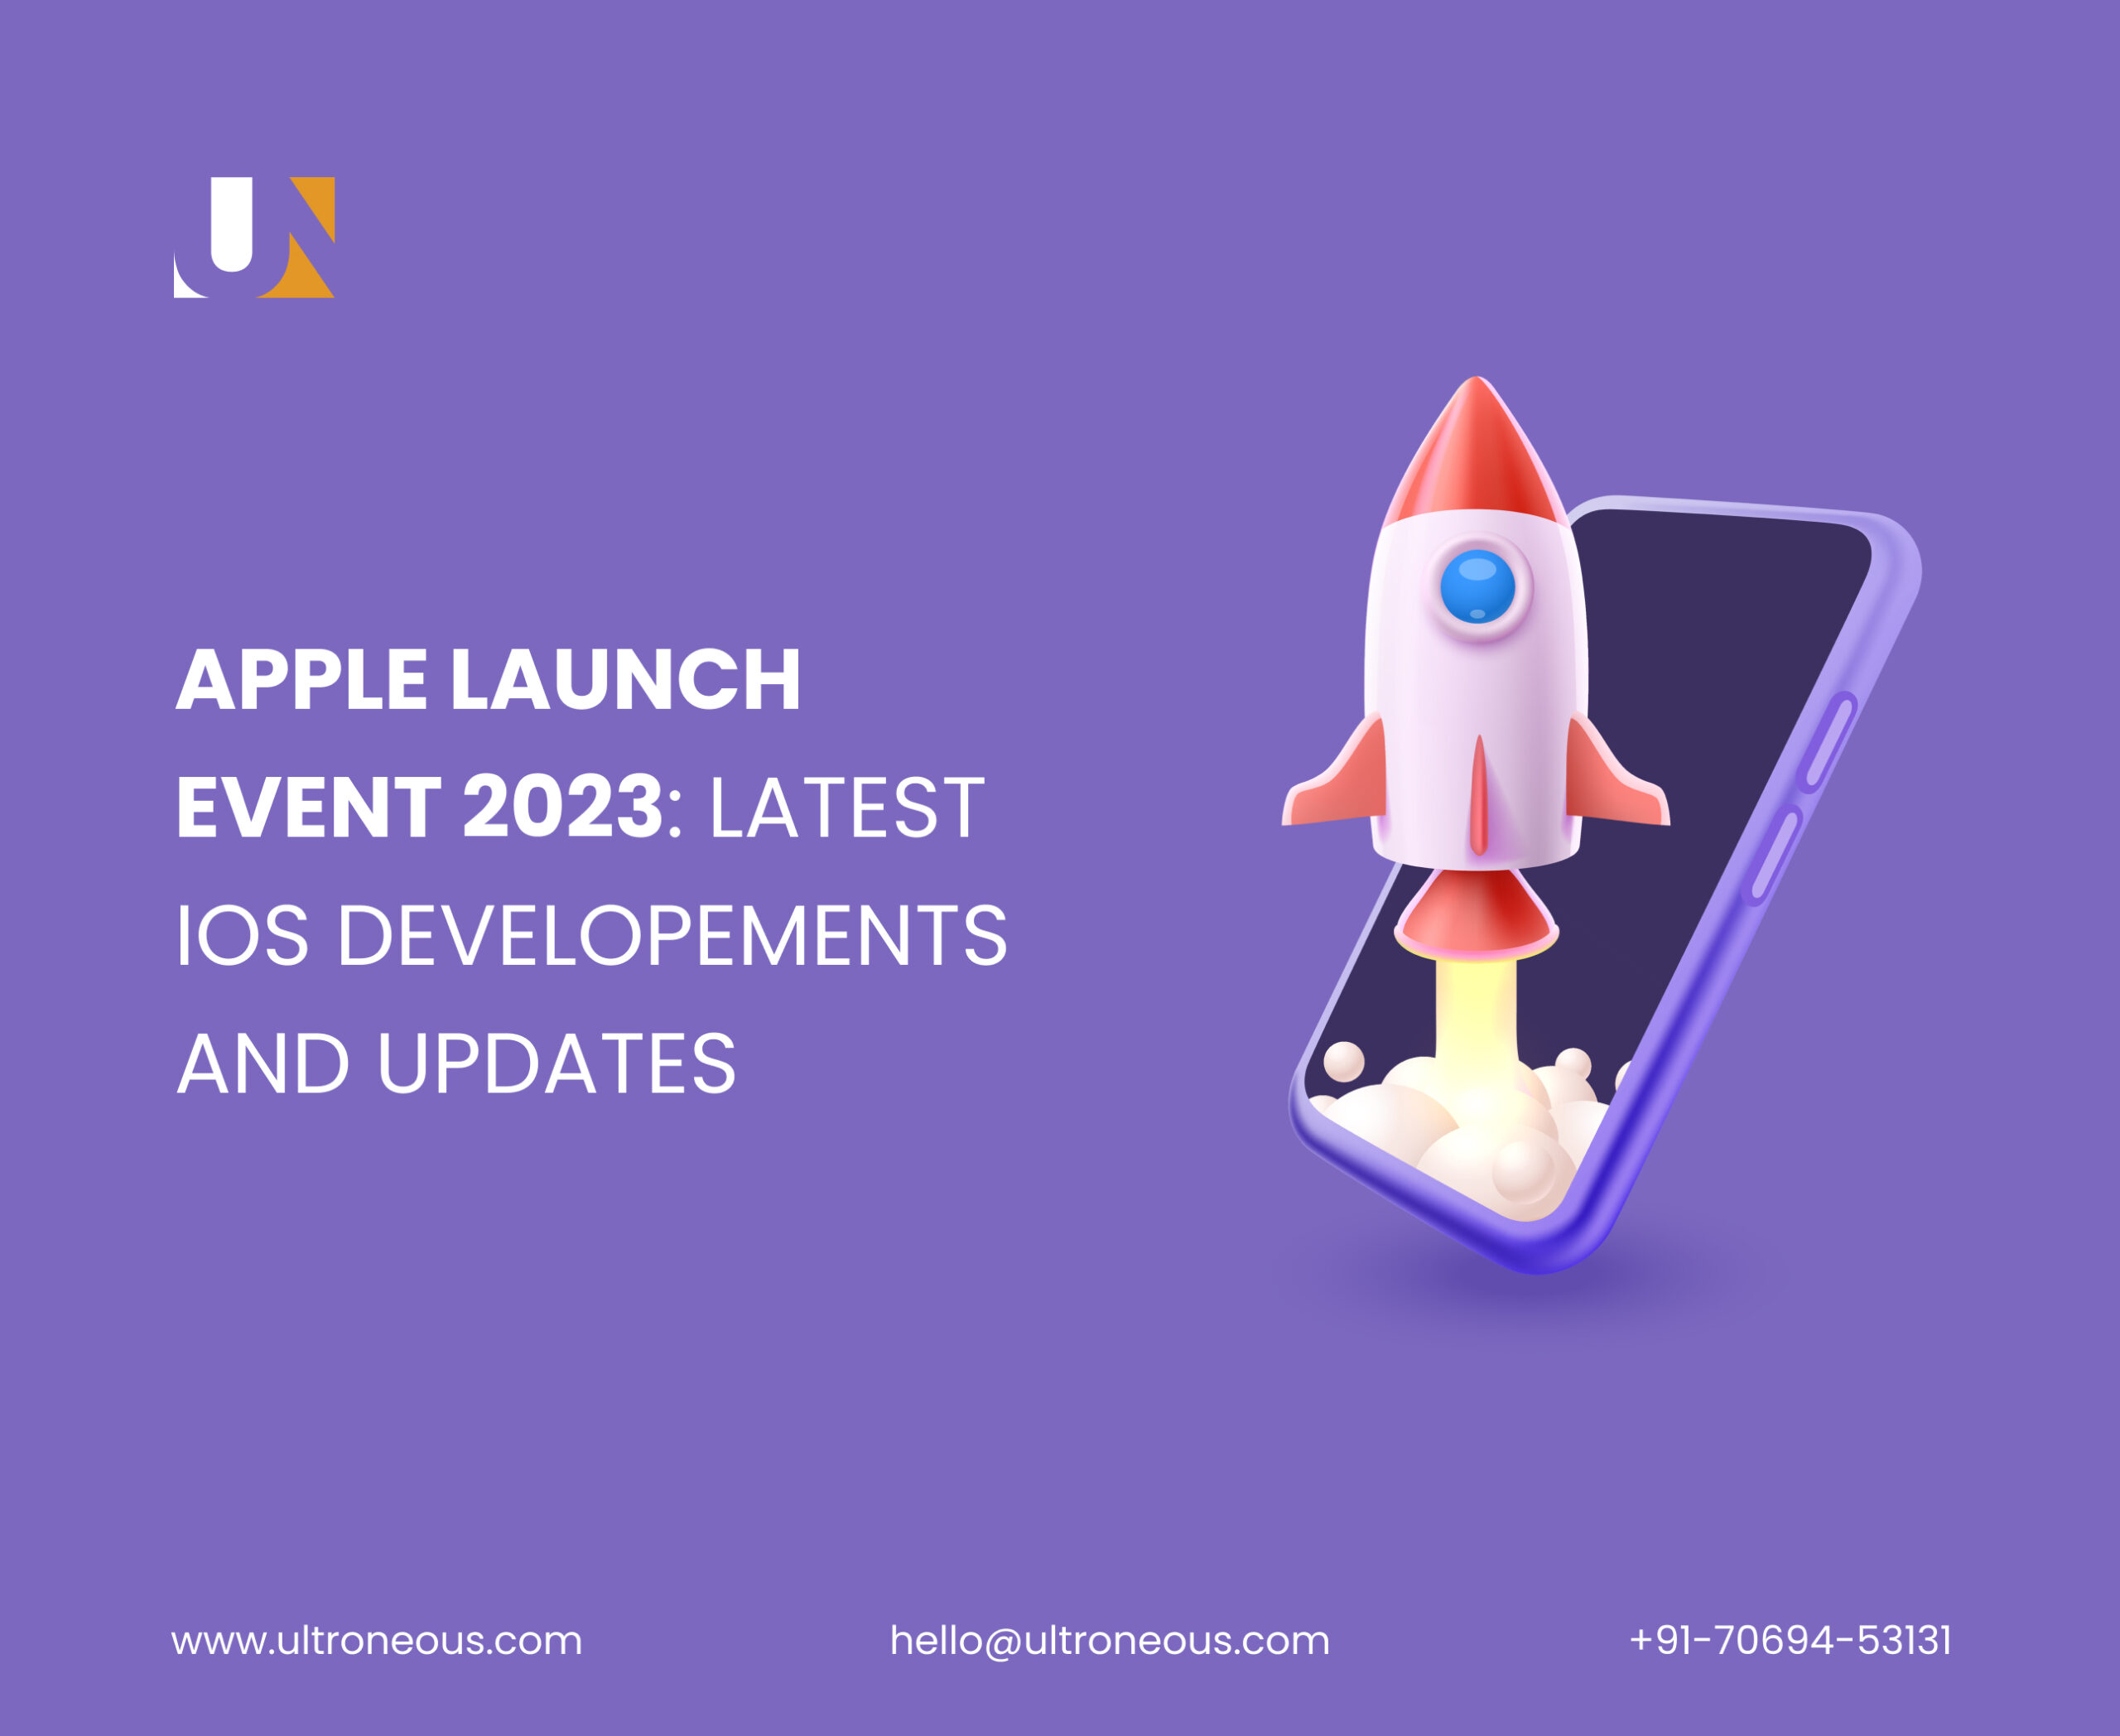 Apple Launch Event 2023: Latest Ios Development And Updates